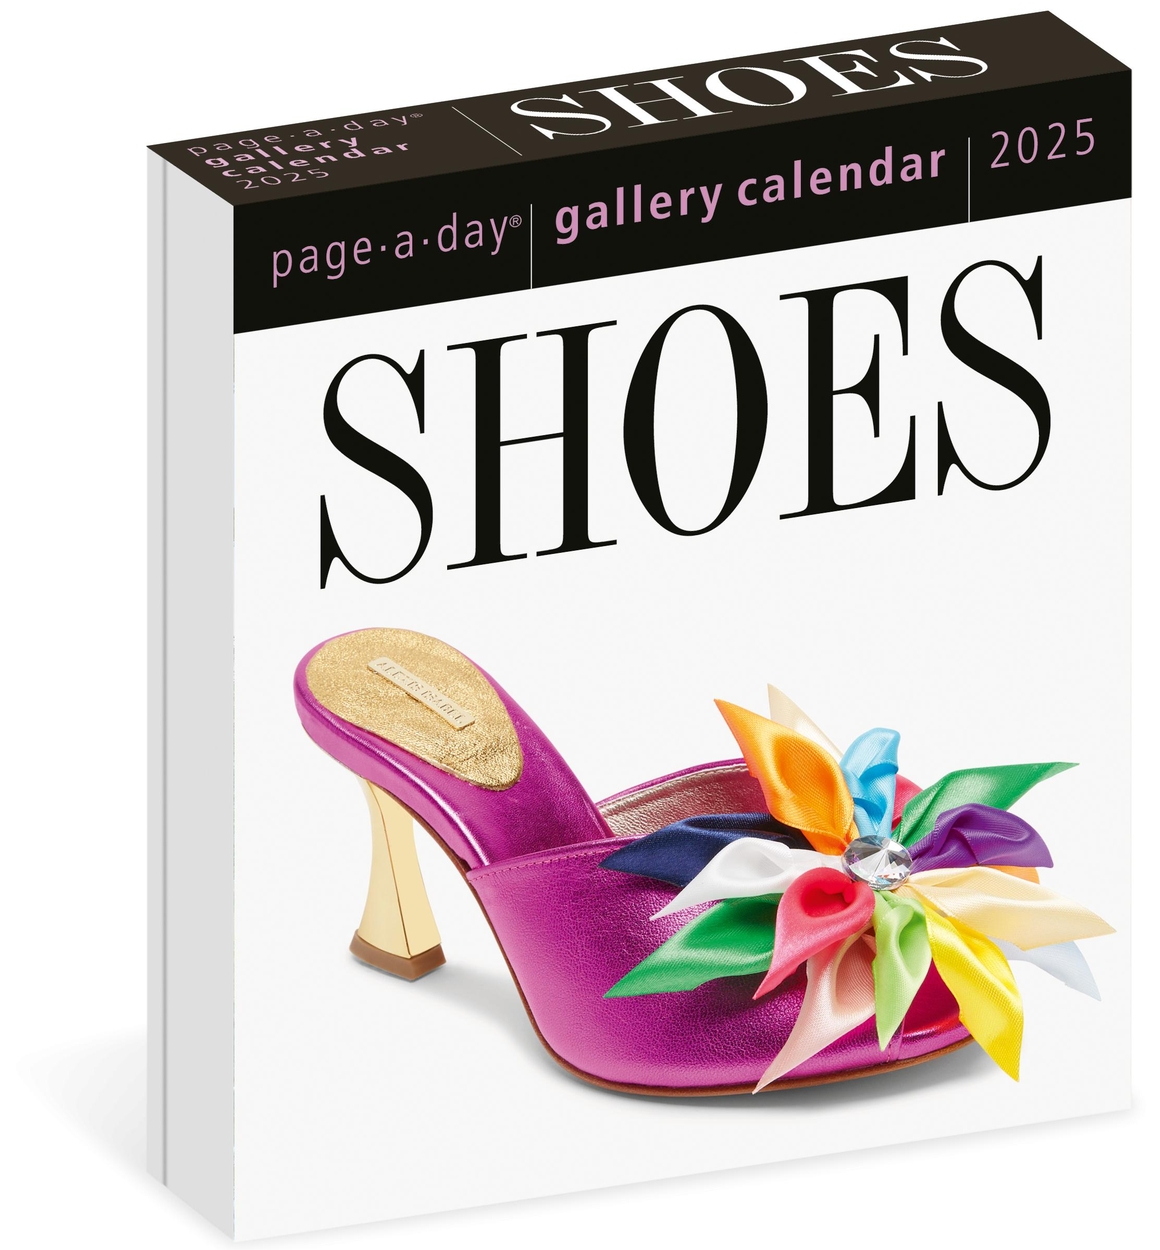 shoes-page-a-day-gallery-calendar-2025-by-workman-calendars-hachette-uk